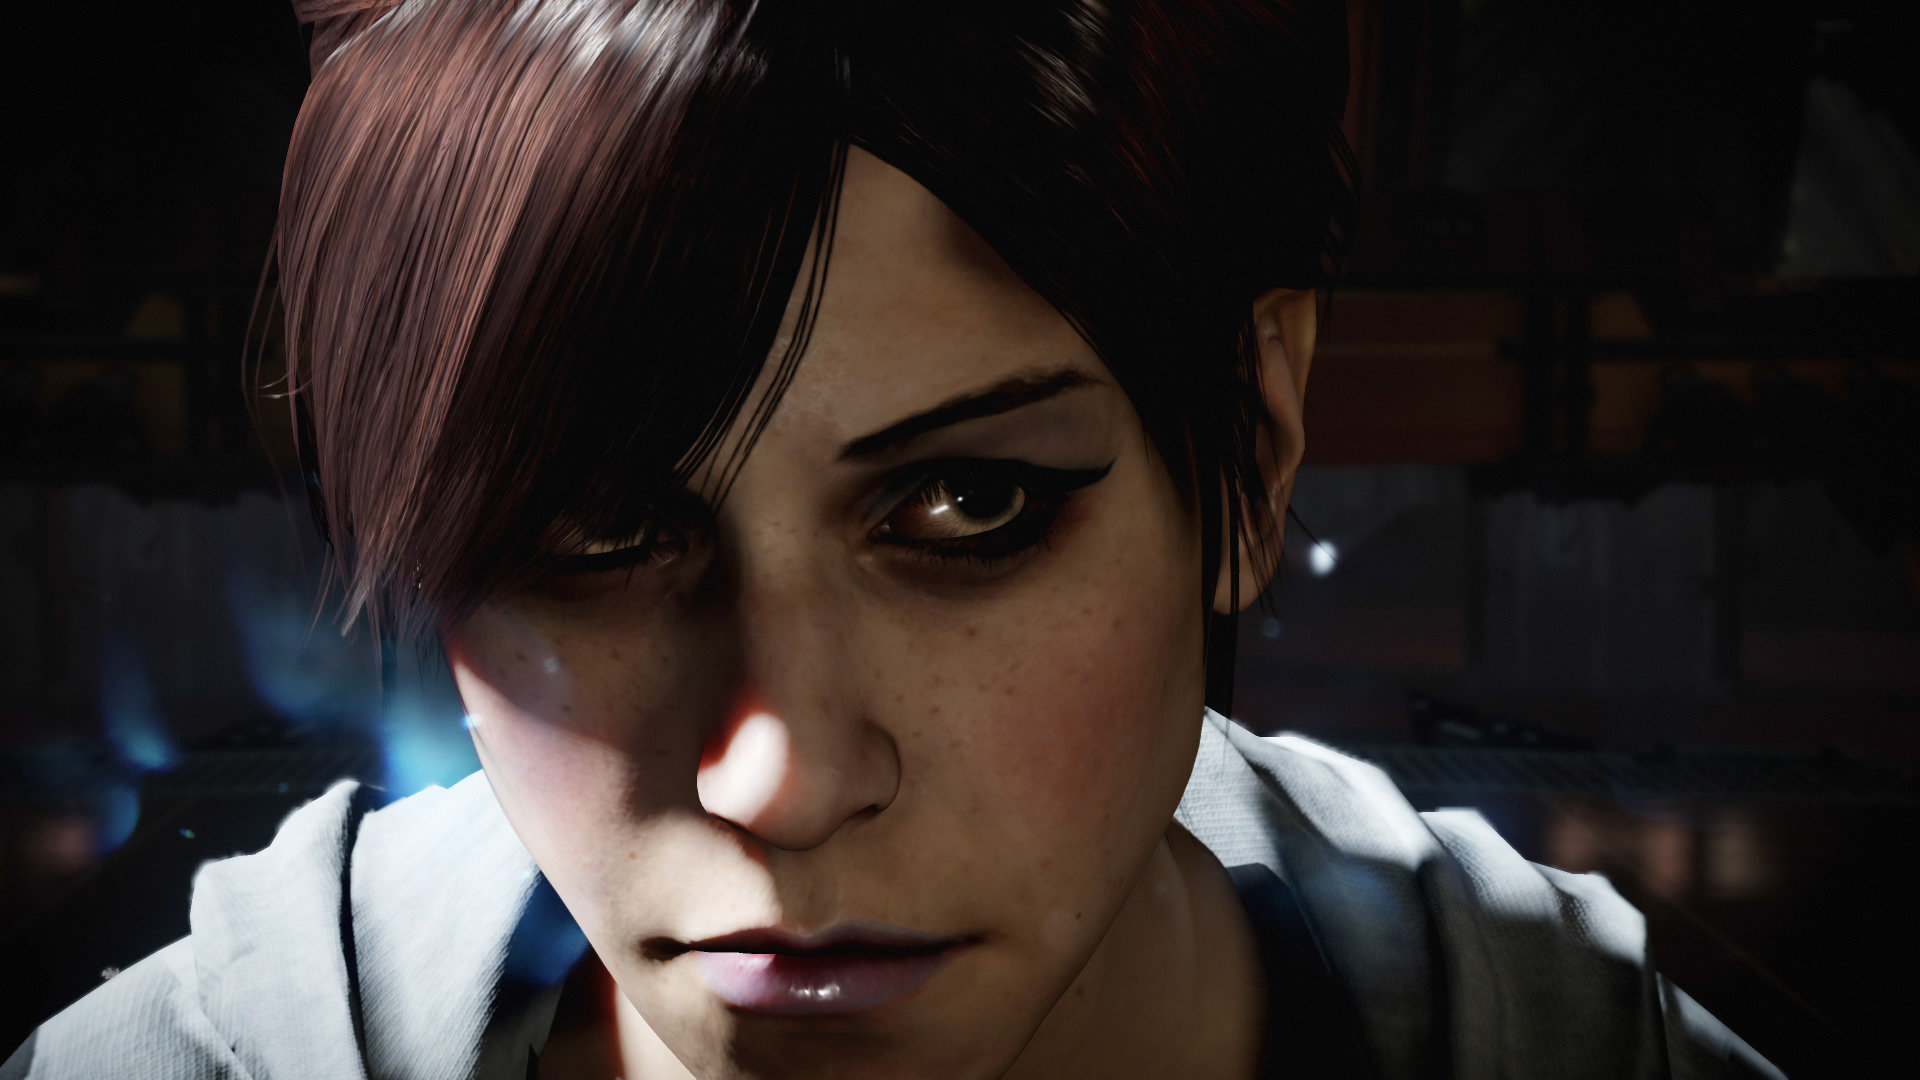 inFamous: First Light #1